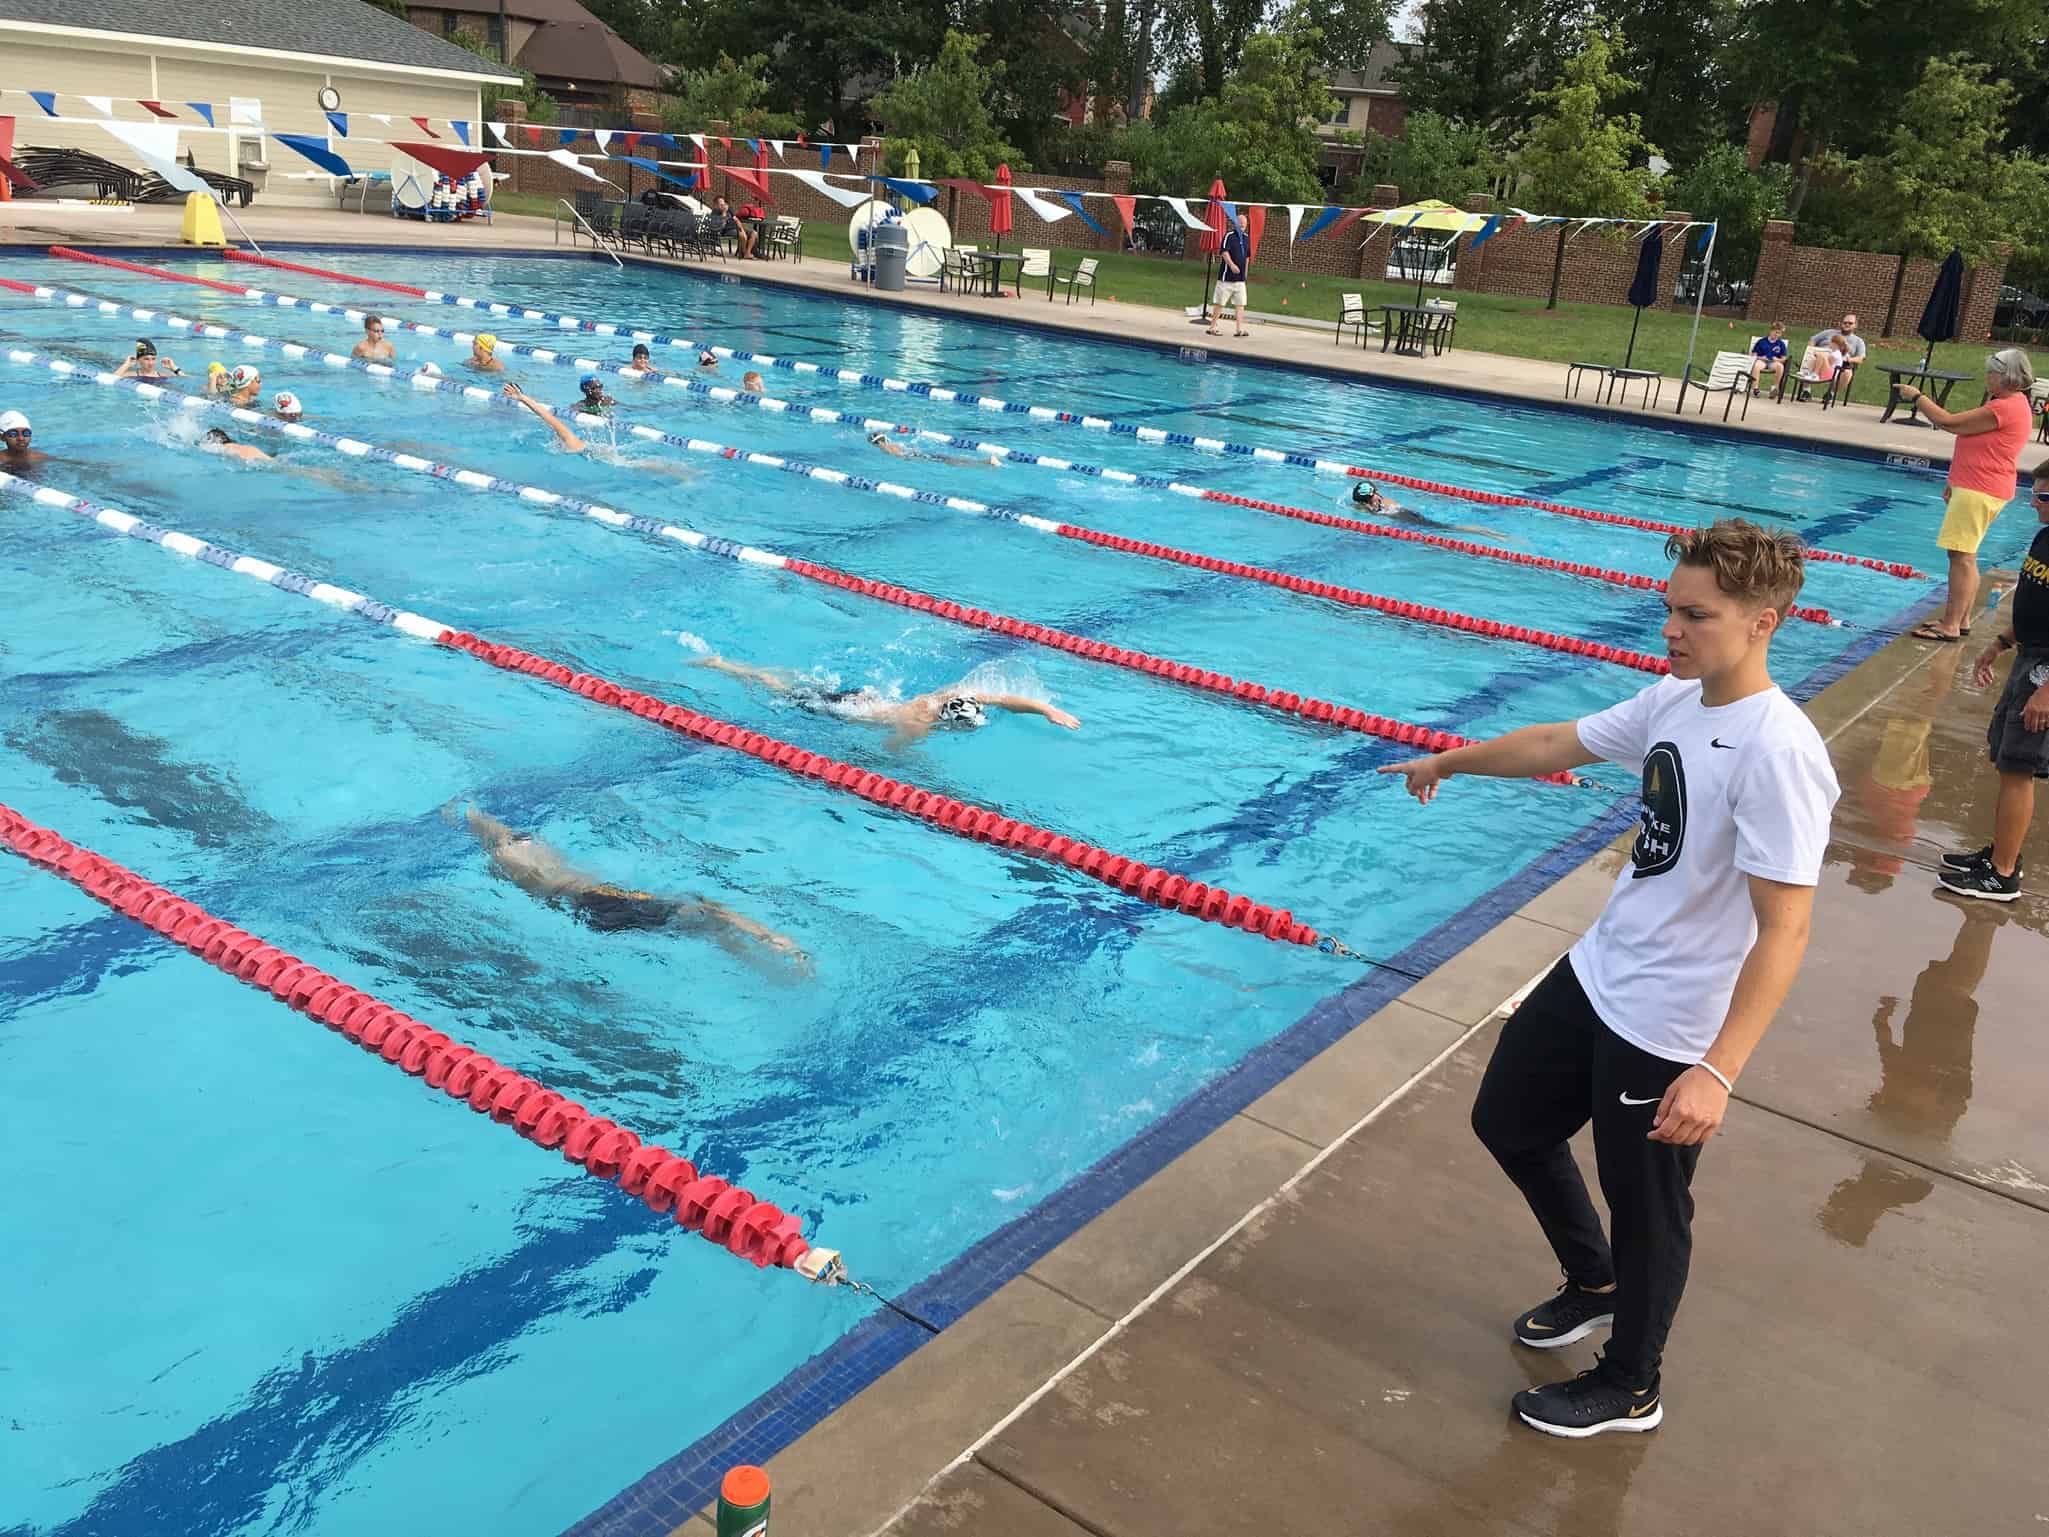 Abbie Fish providing in-person coaching during a swim camp.